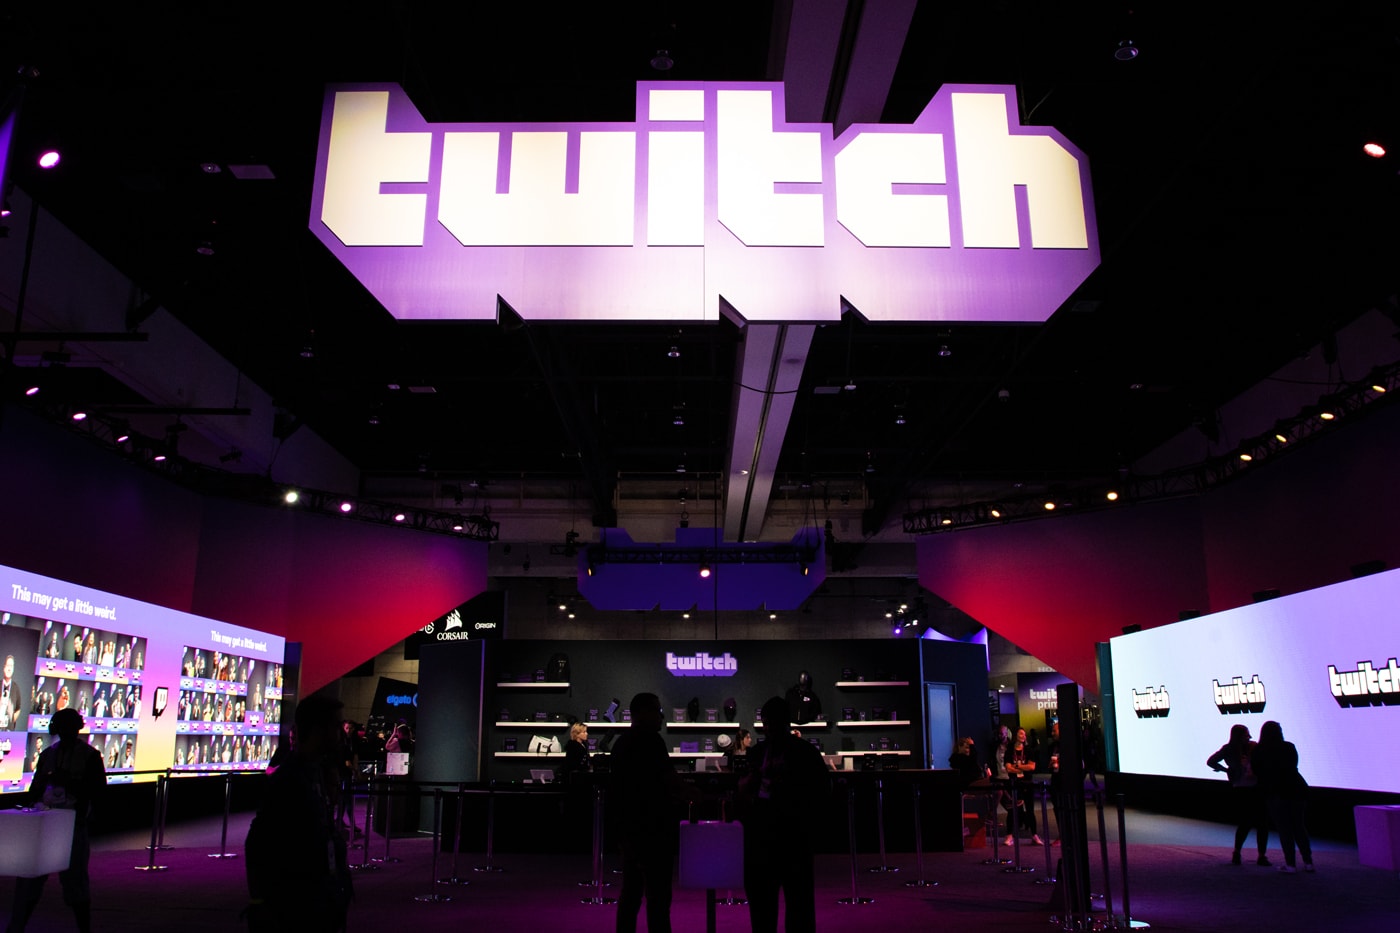 relaunches Twitch Prime as Prime Gaming